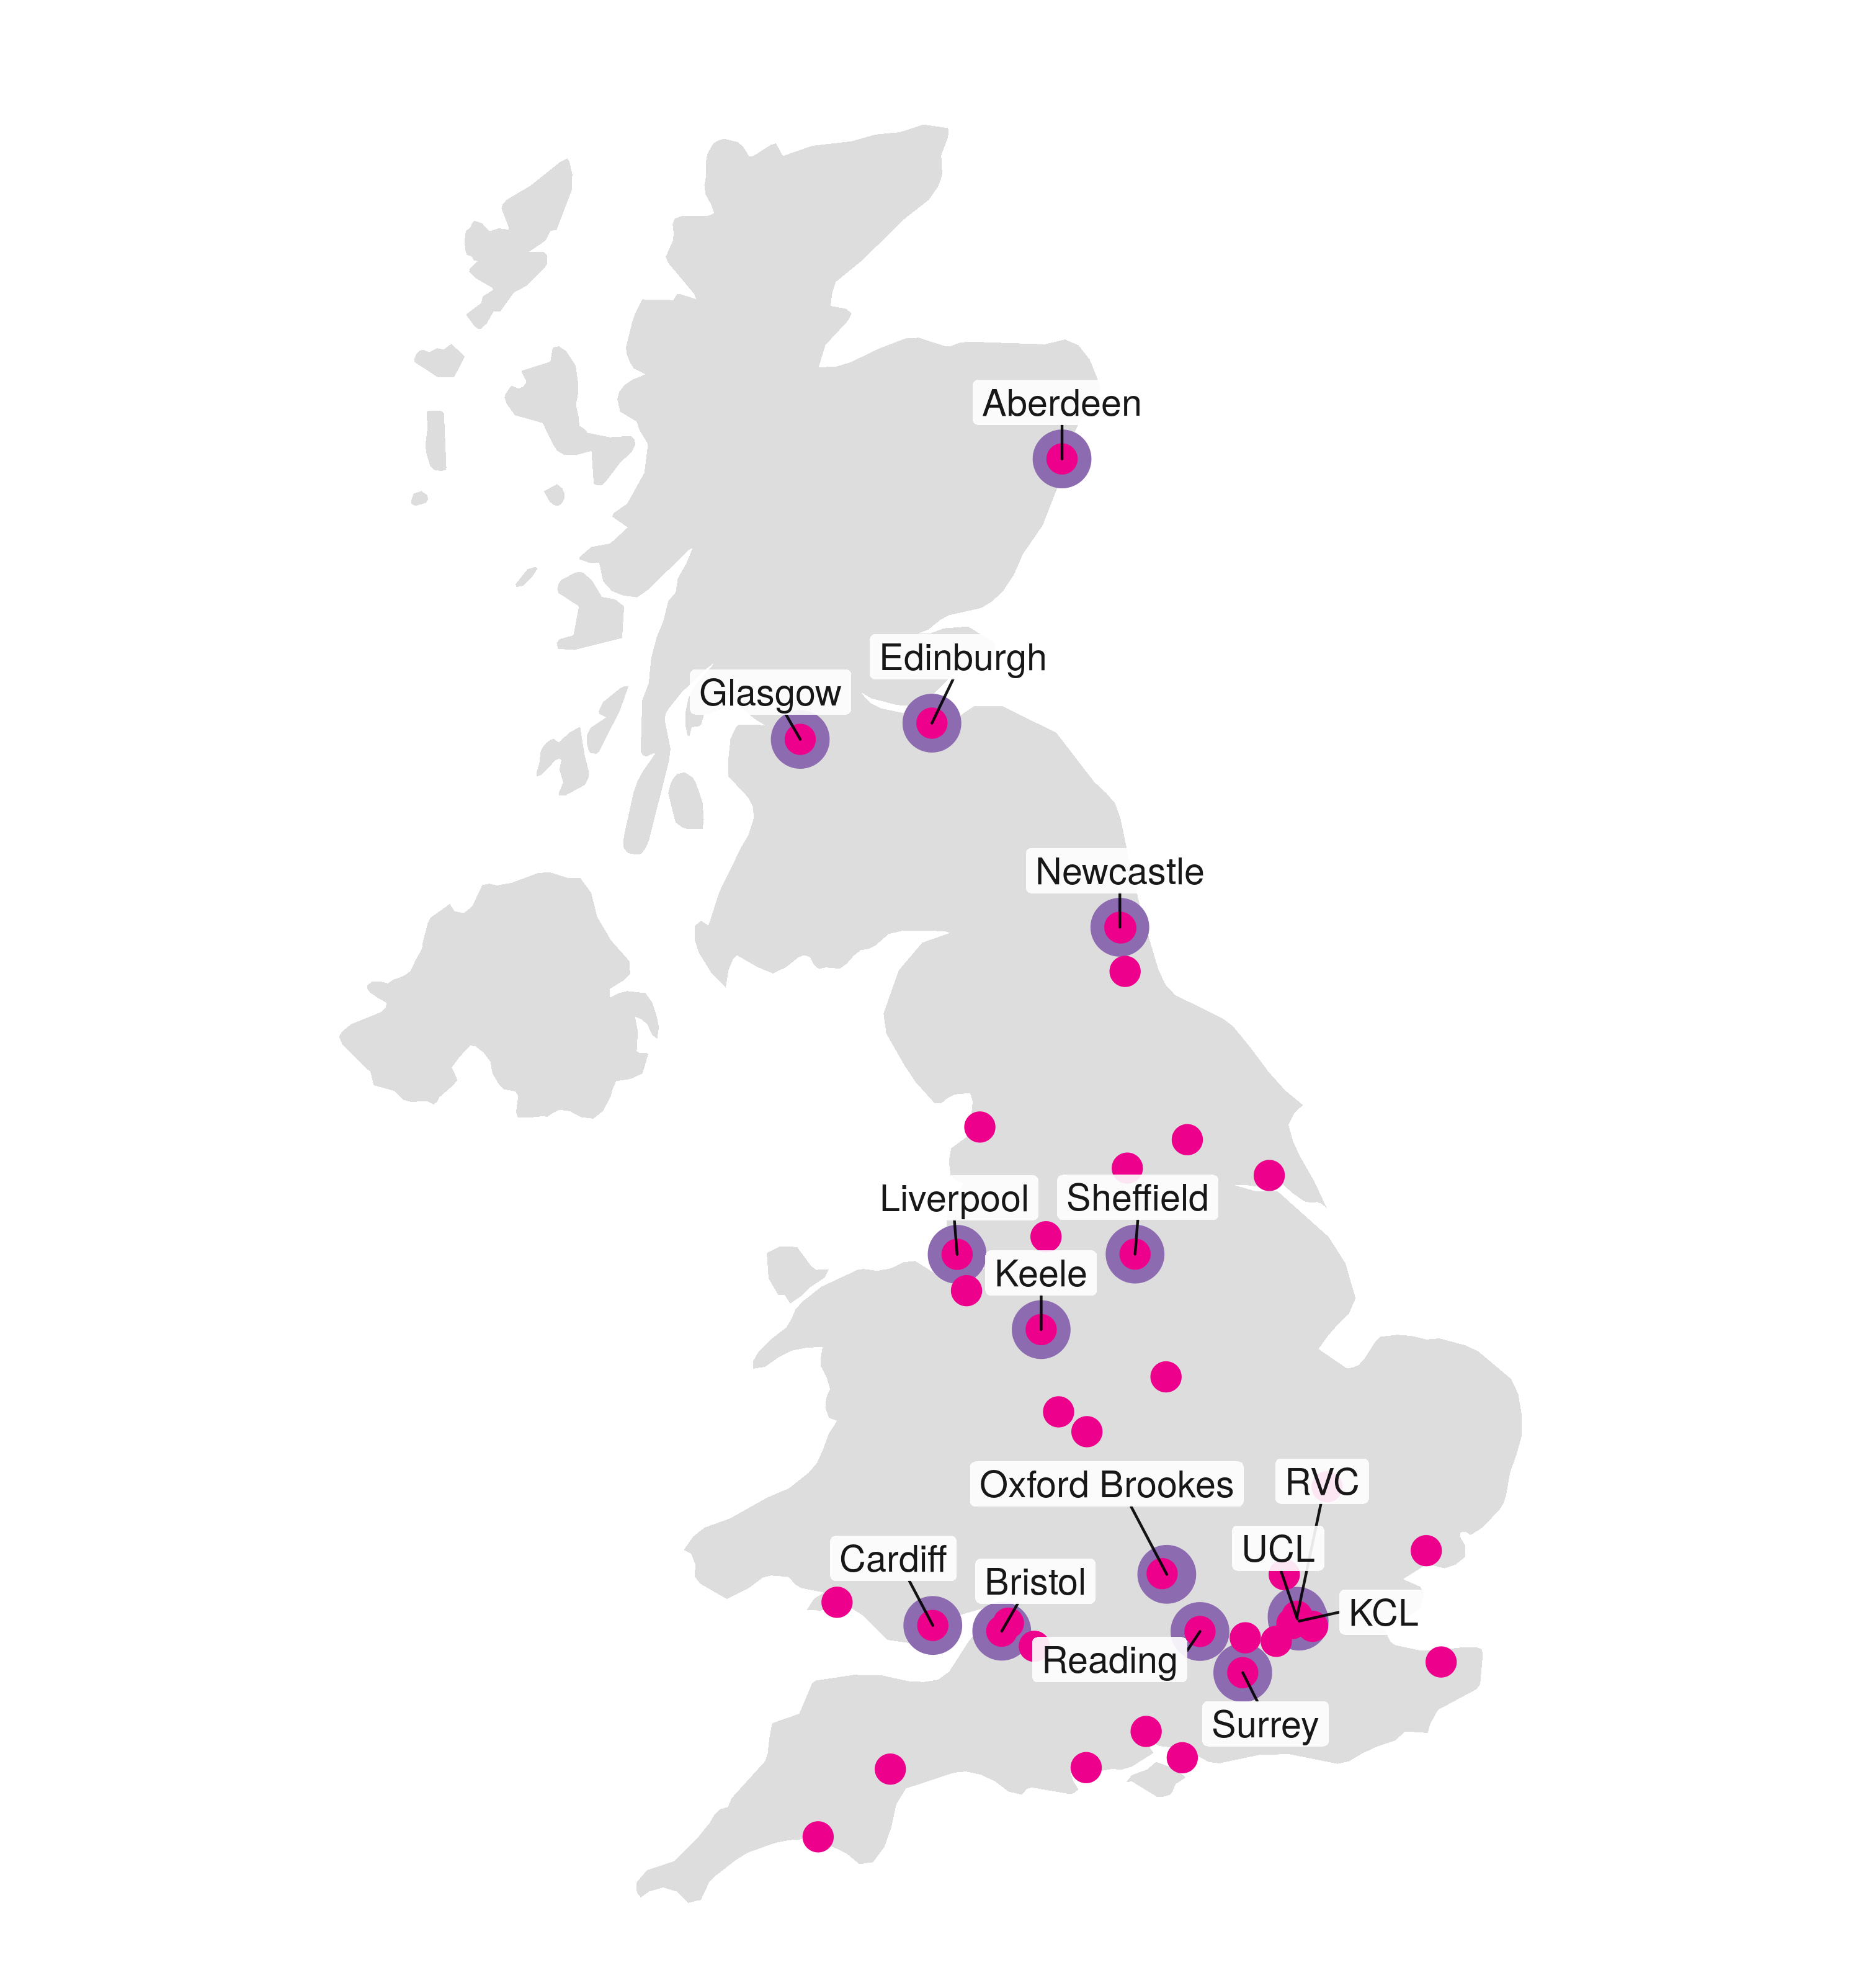 UK map with location of institutions